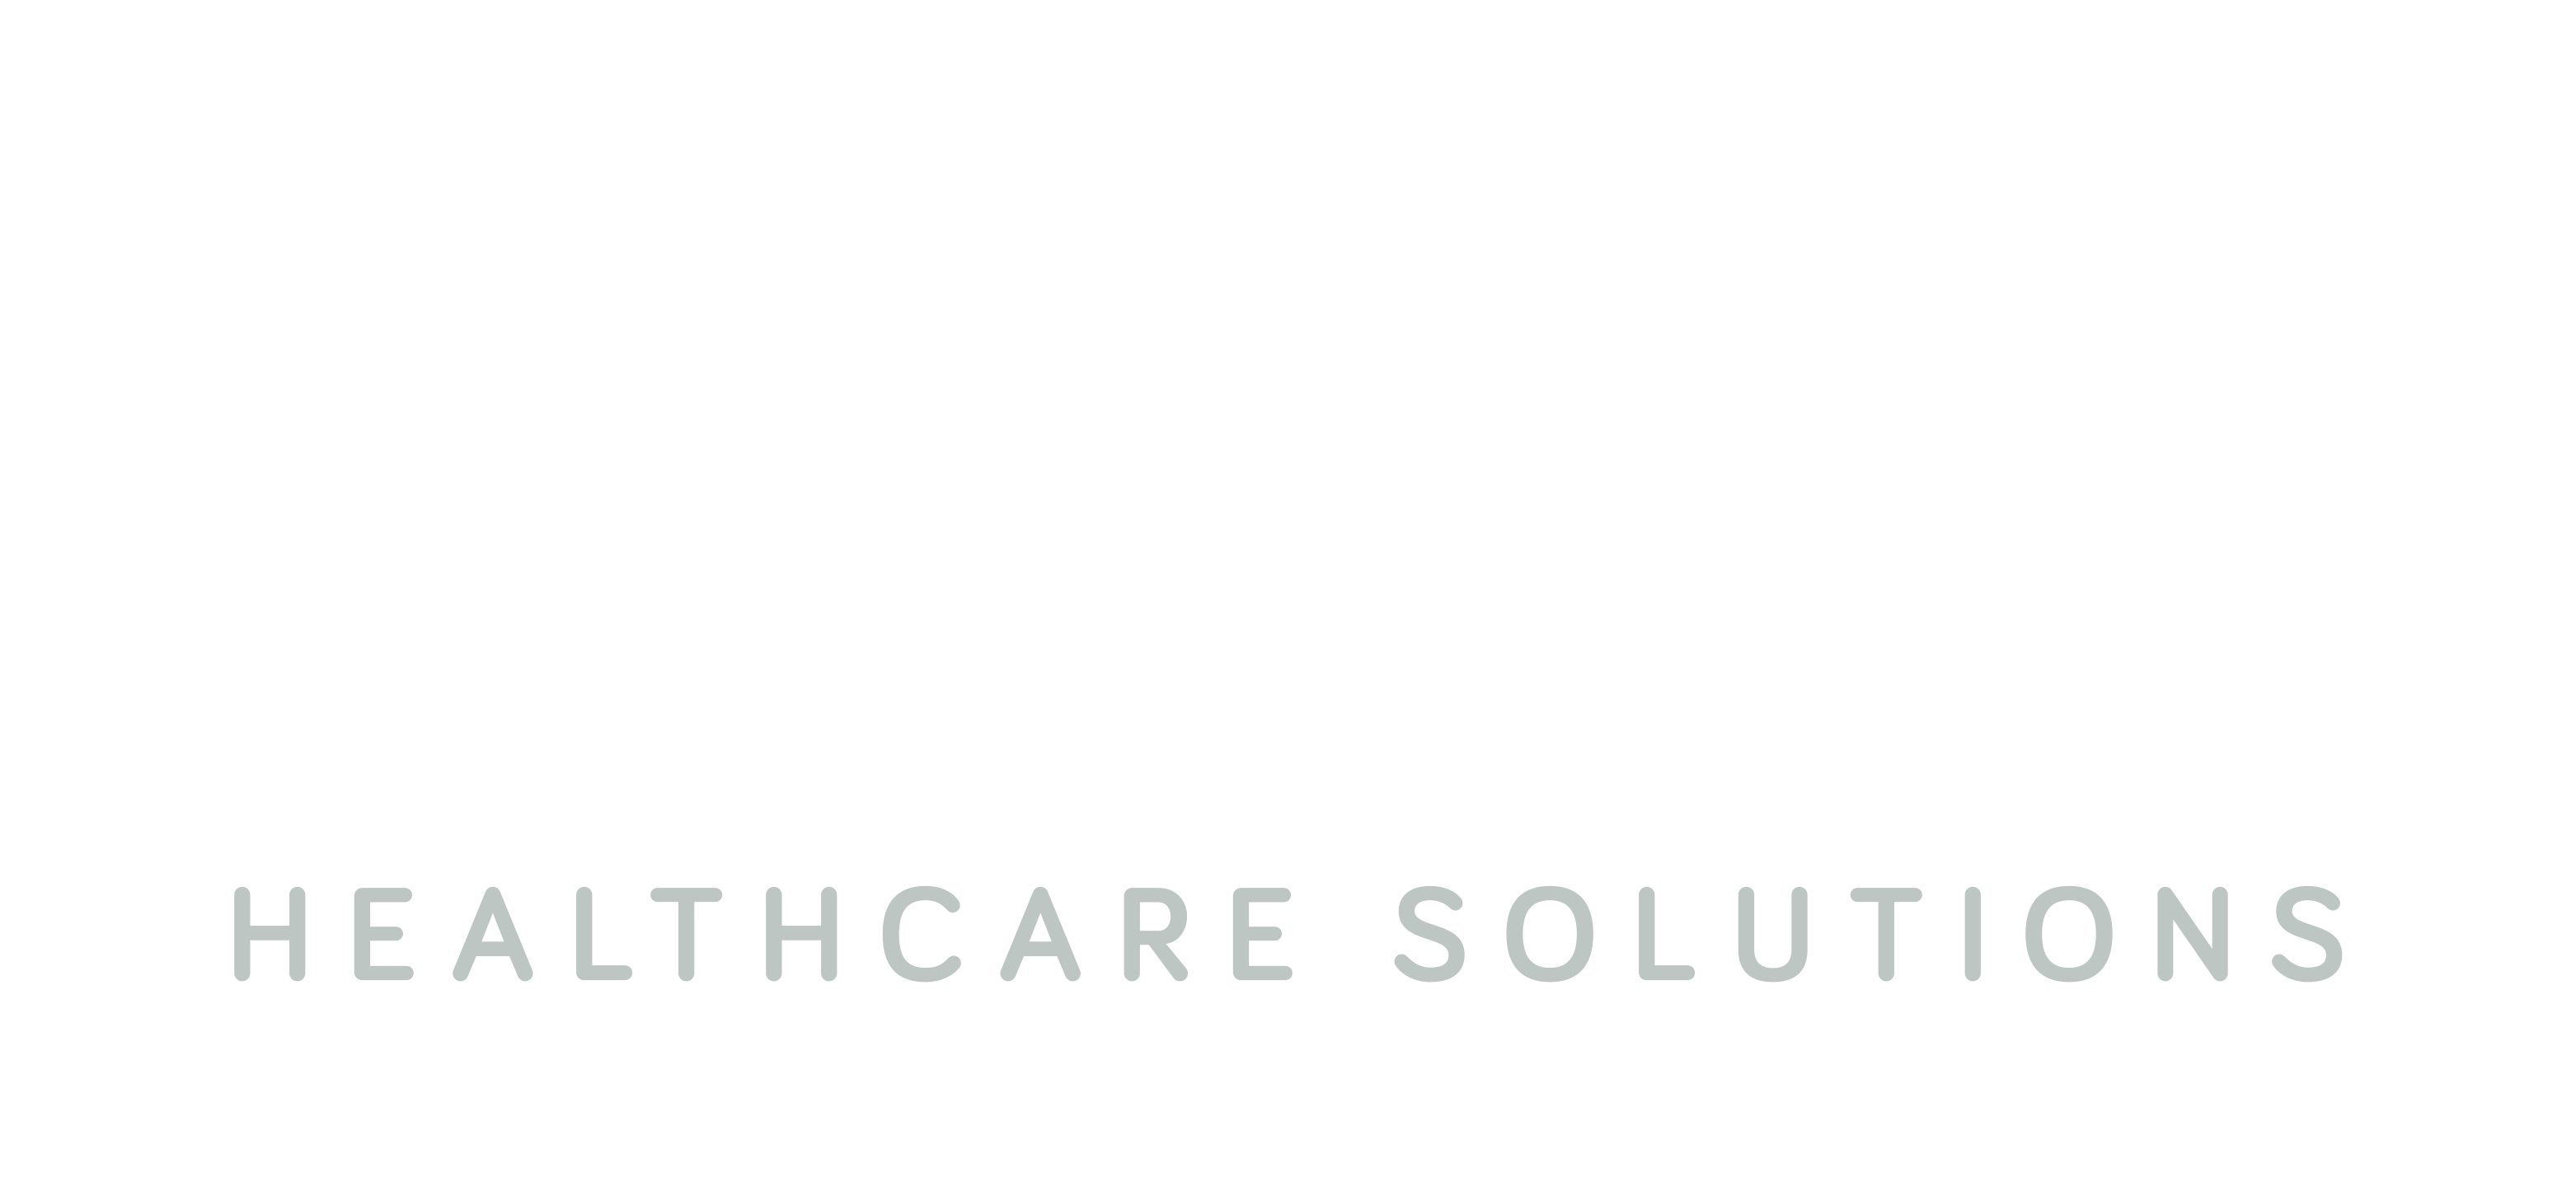 Prism Healthcare Solutions